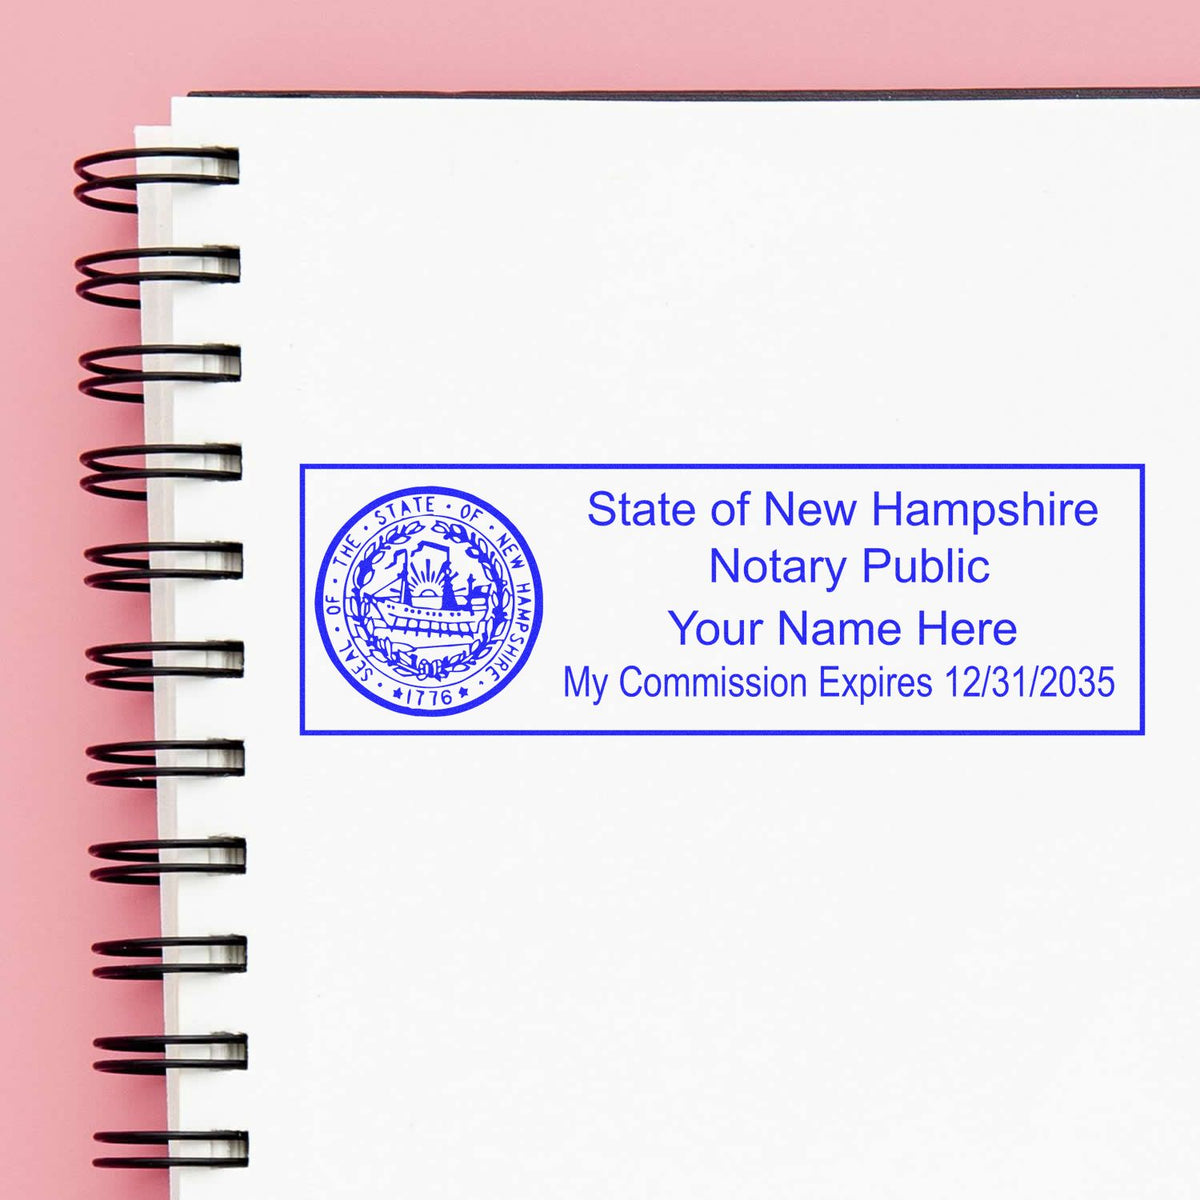 A stamped impression of the Self-Inking State Seal New Hampshire Notary Stamp in this stylish lifestyle photo, setting the tone for a unique and personalized product.